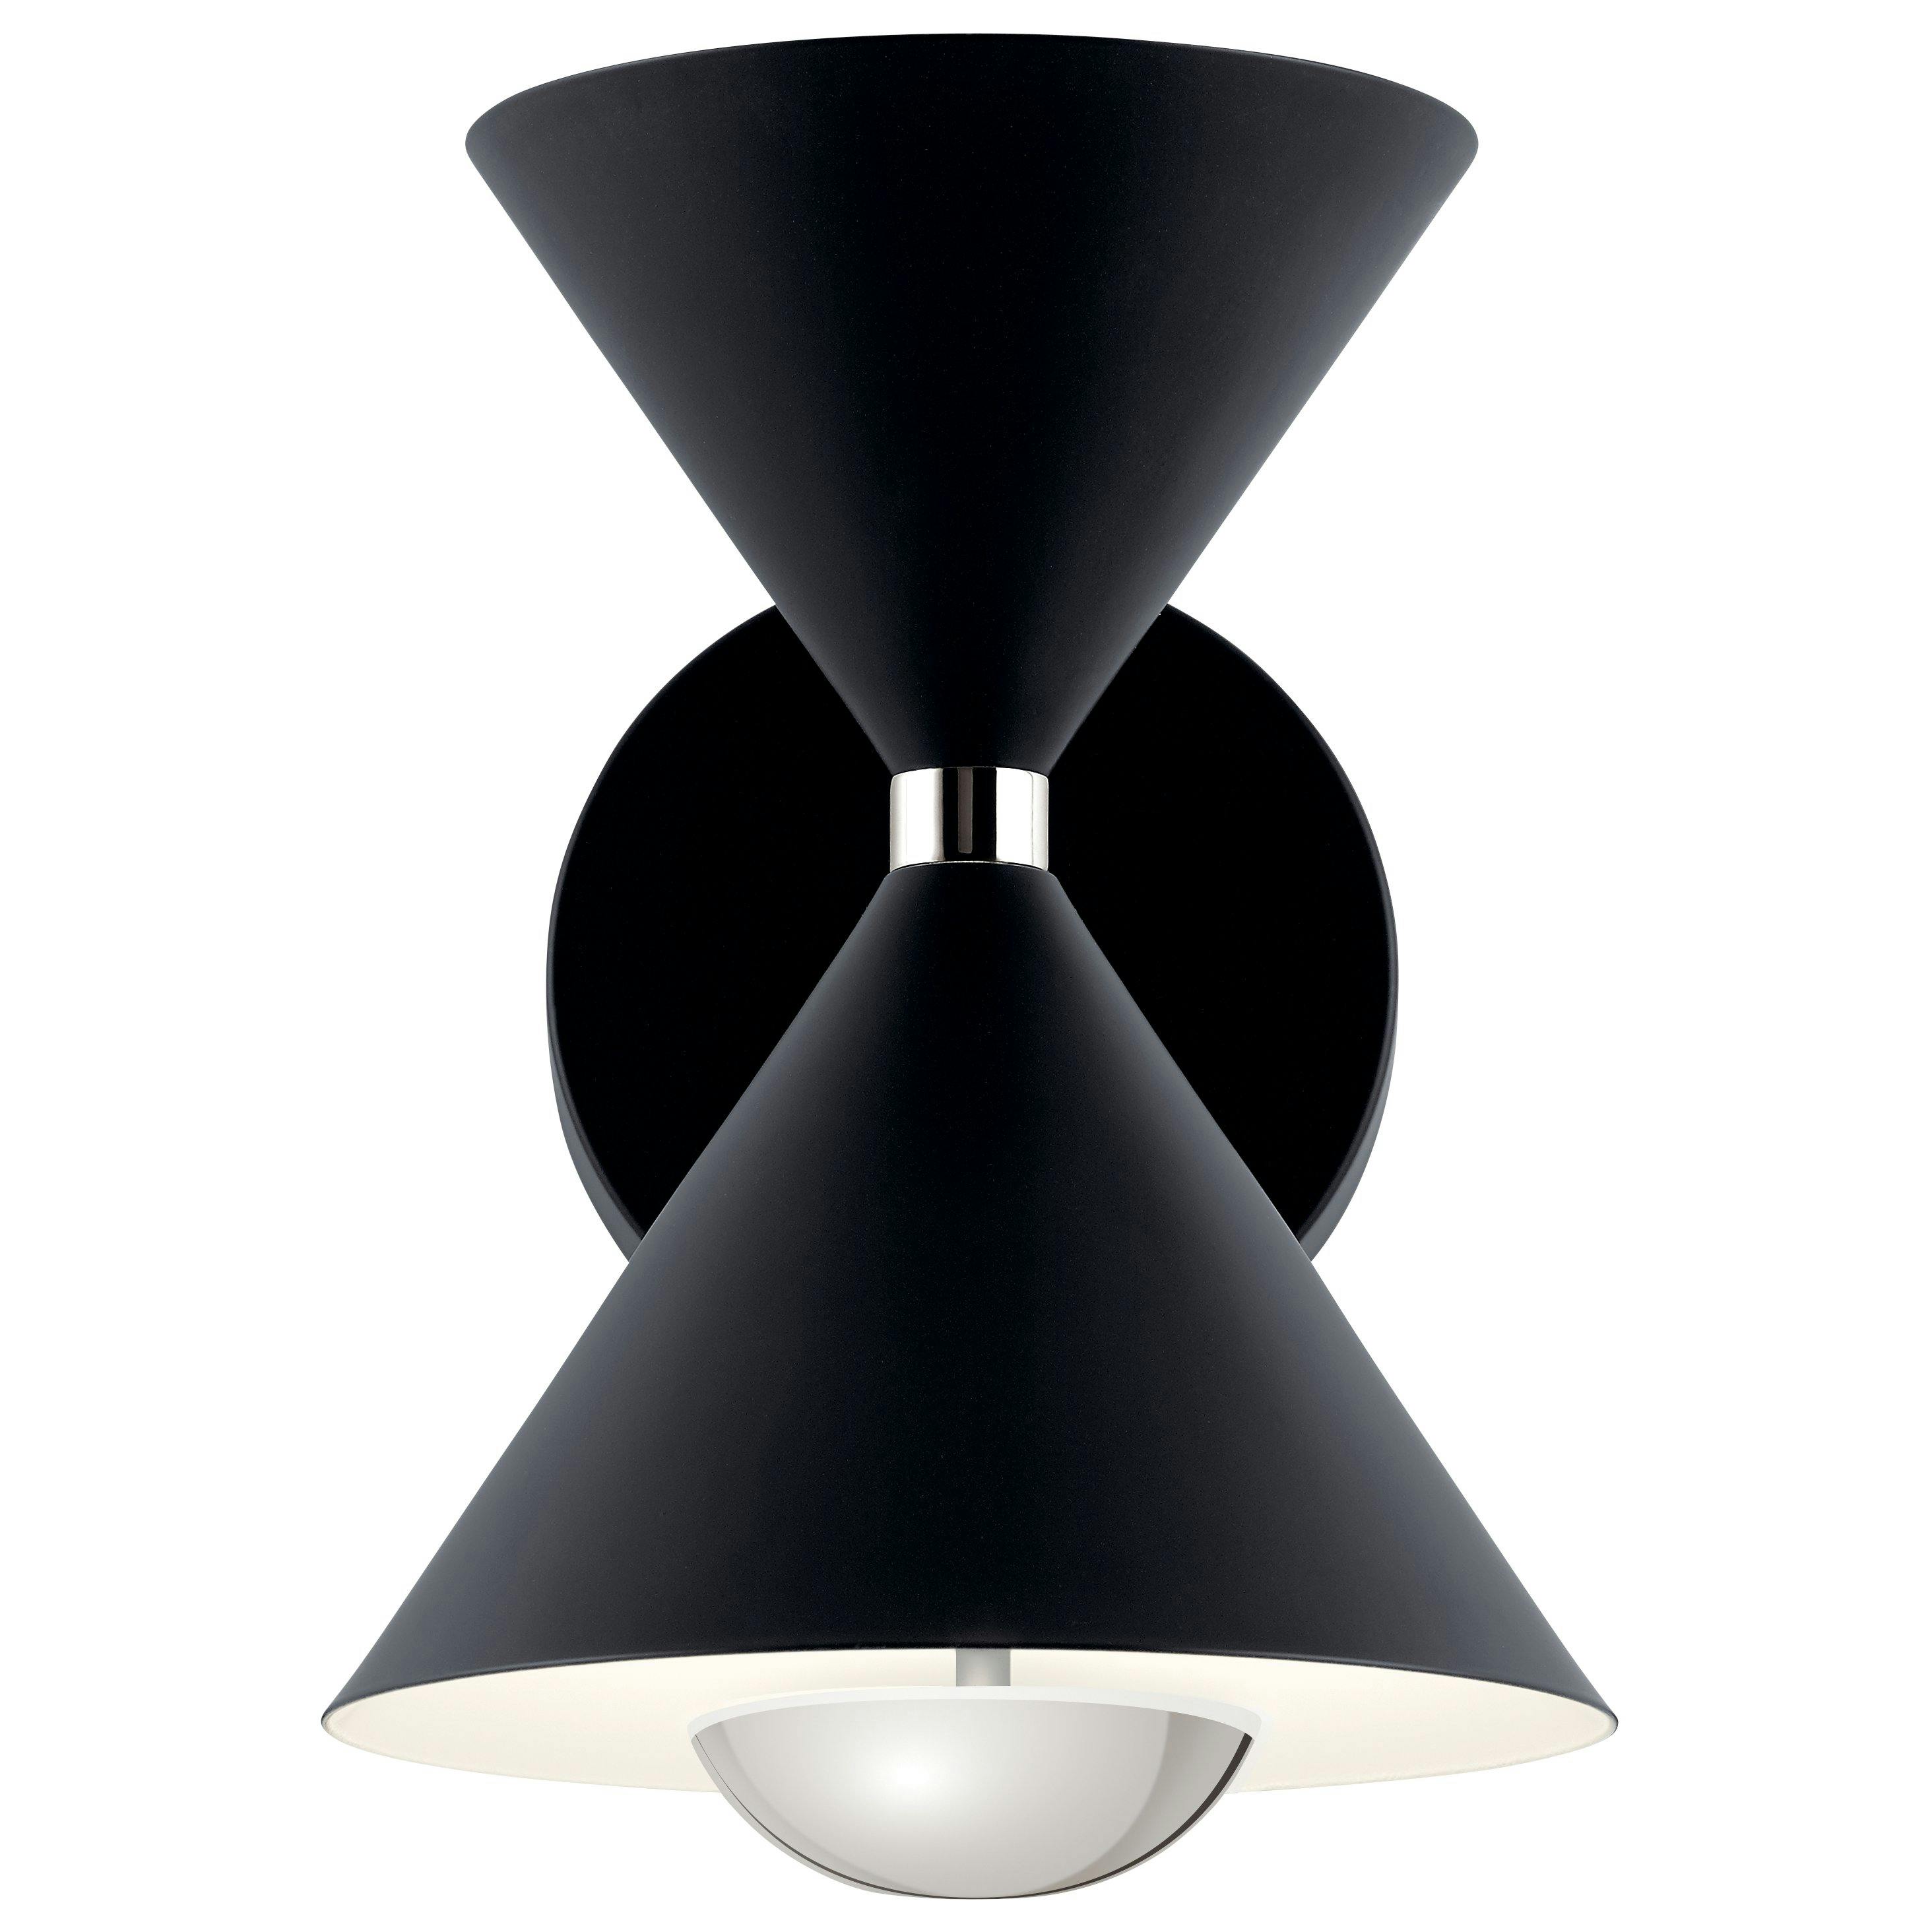 Front view of the Kordan™ Wall Sconce Matte Black on a white background